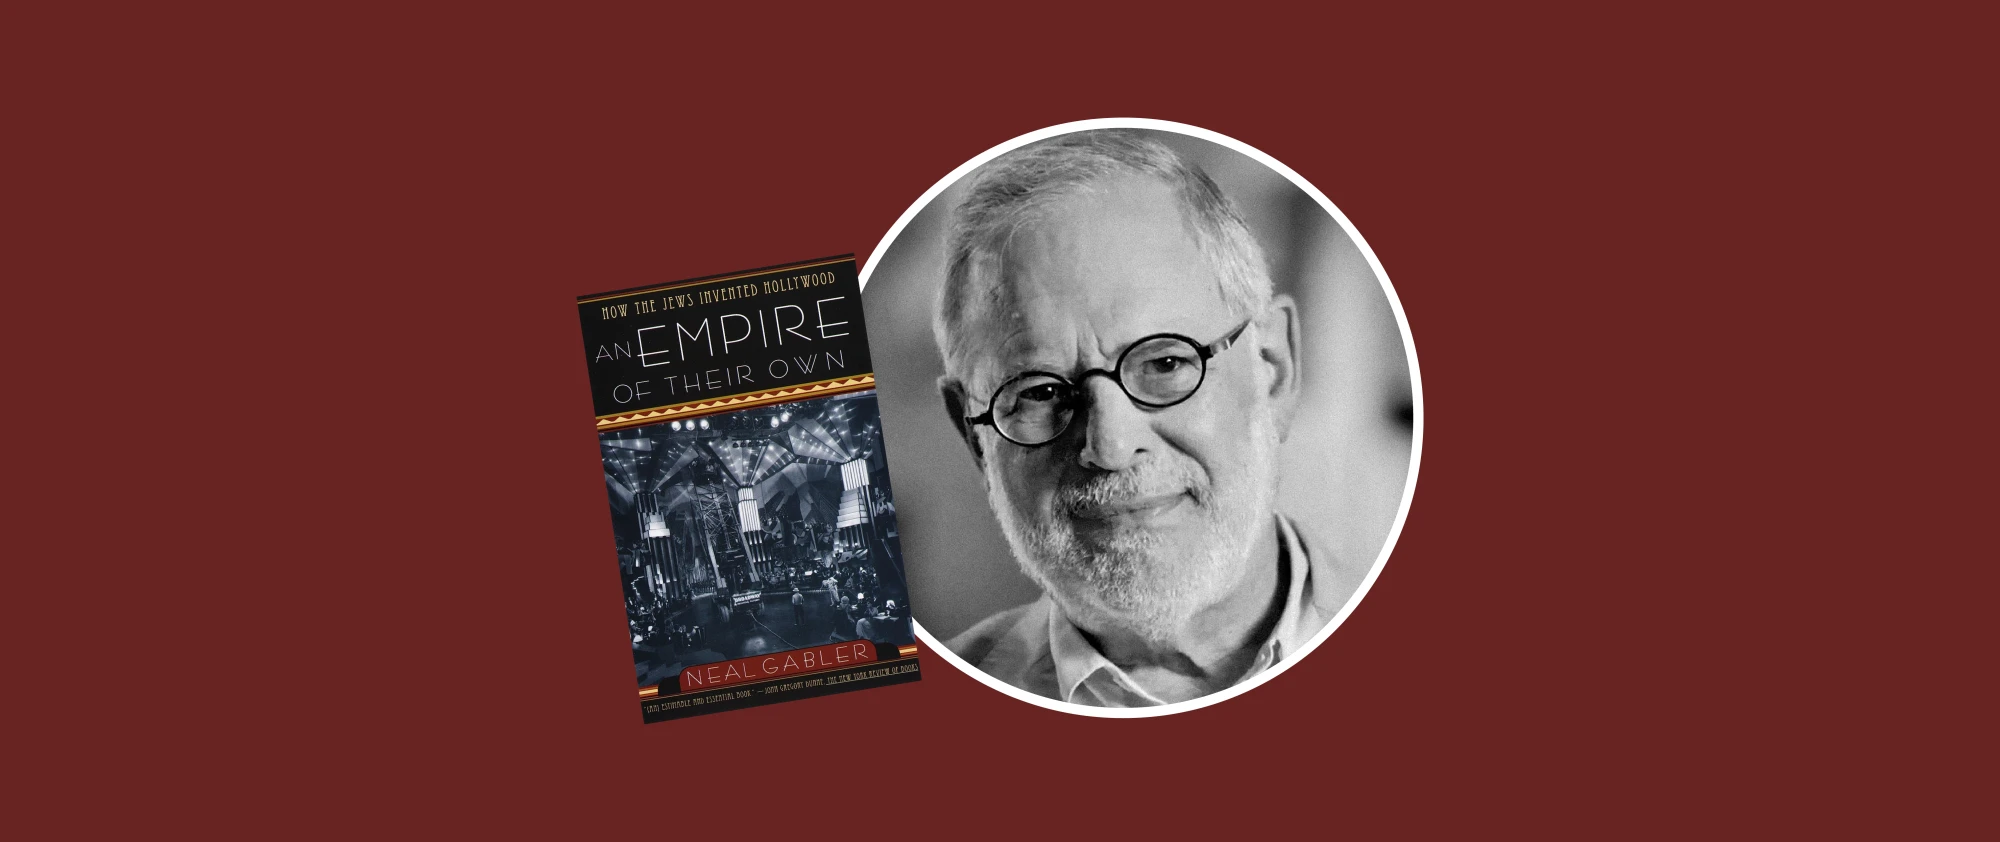 Image of Neal Gabler with a cover from the book; "An Empire of Their Own: How
the Jews Invented Hollywood"